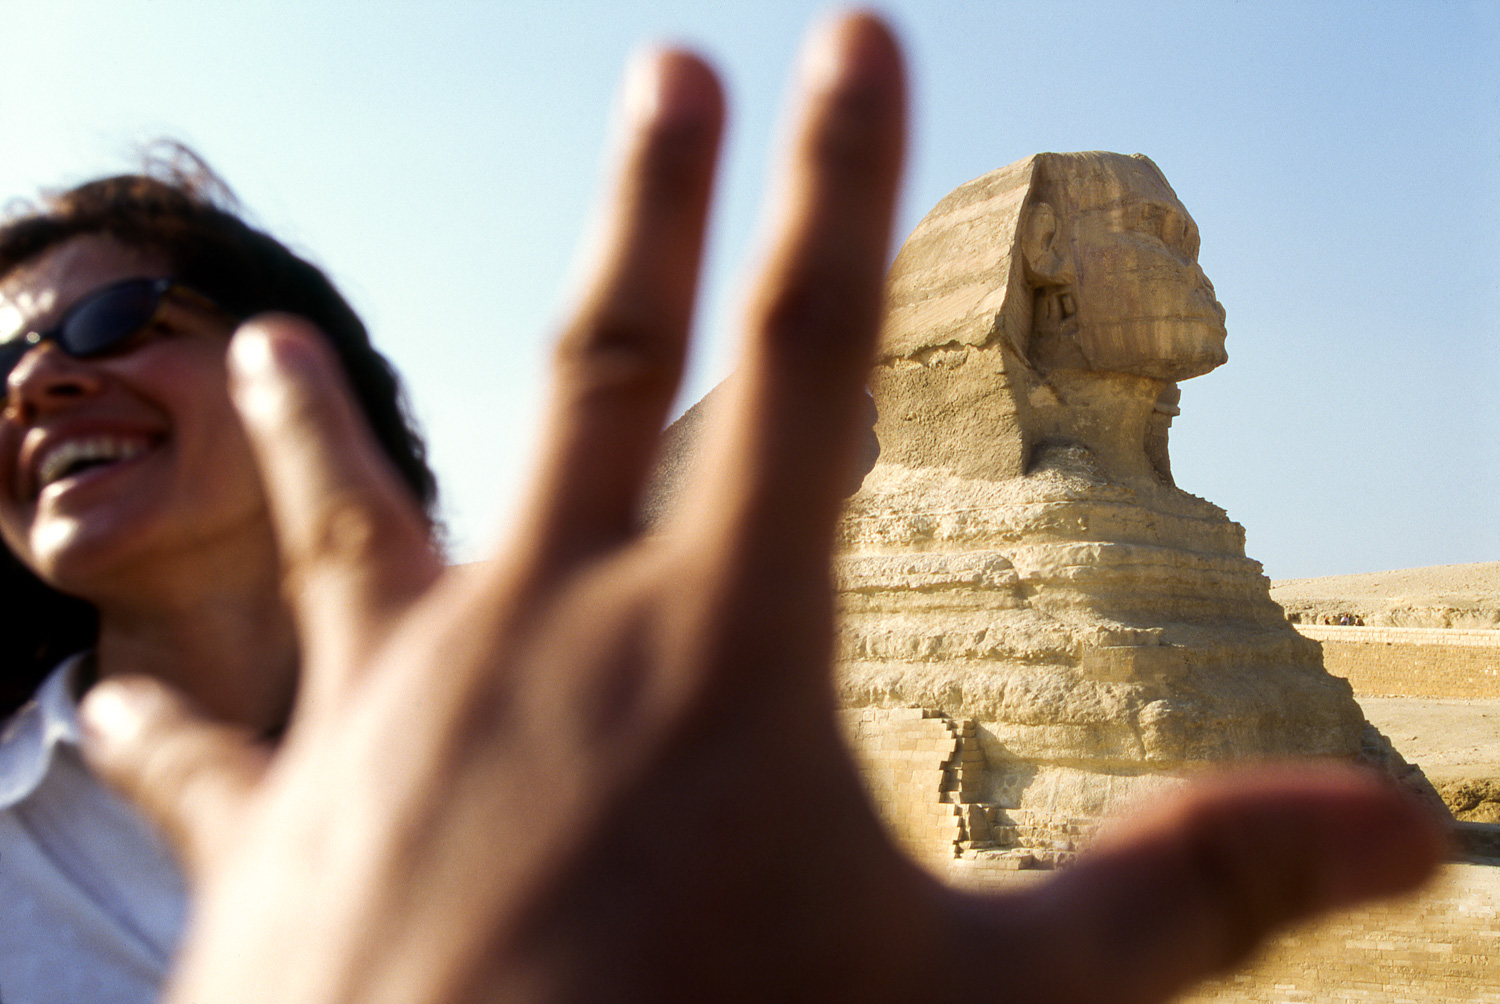 Great Sphinx of Giza - Cairo, Egypt